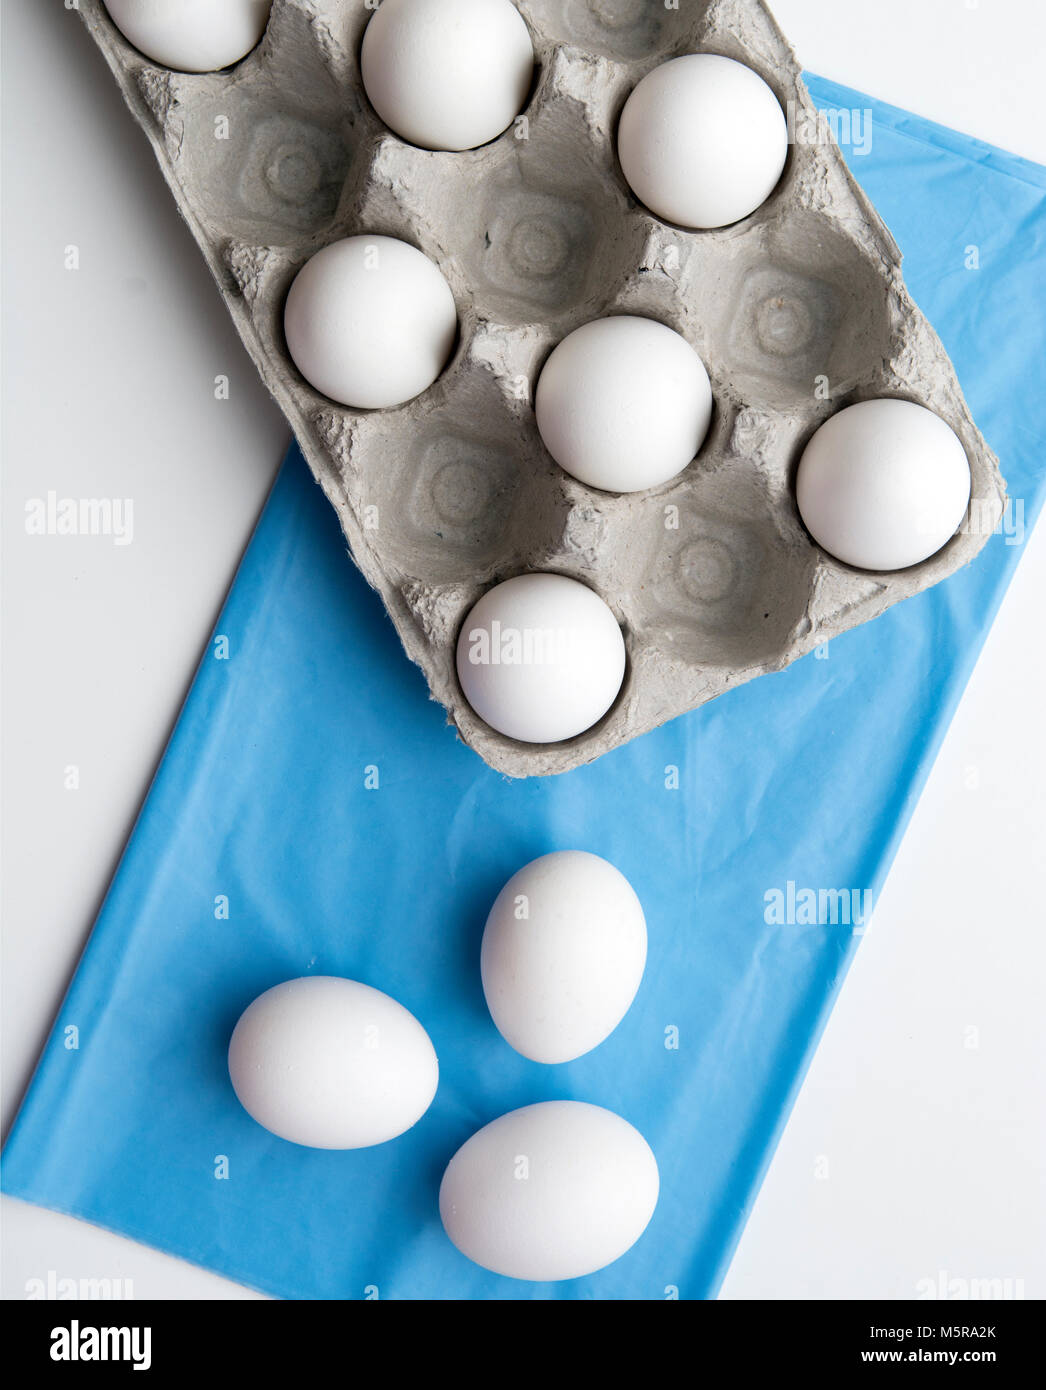 White eggs ready for decorating Stock Photo